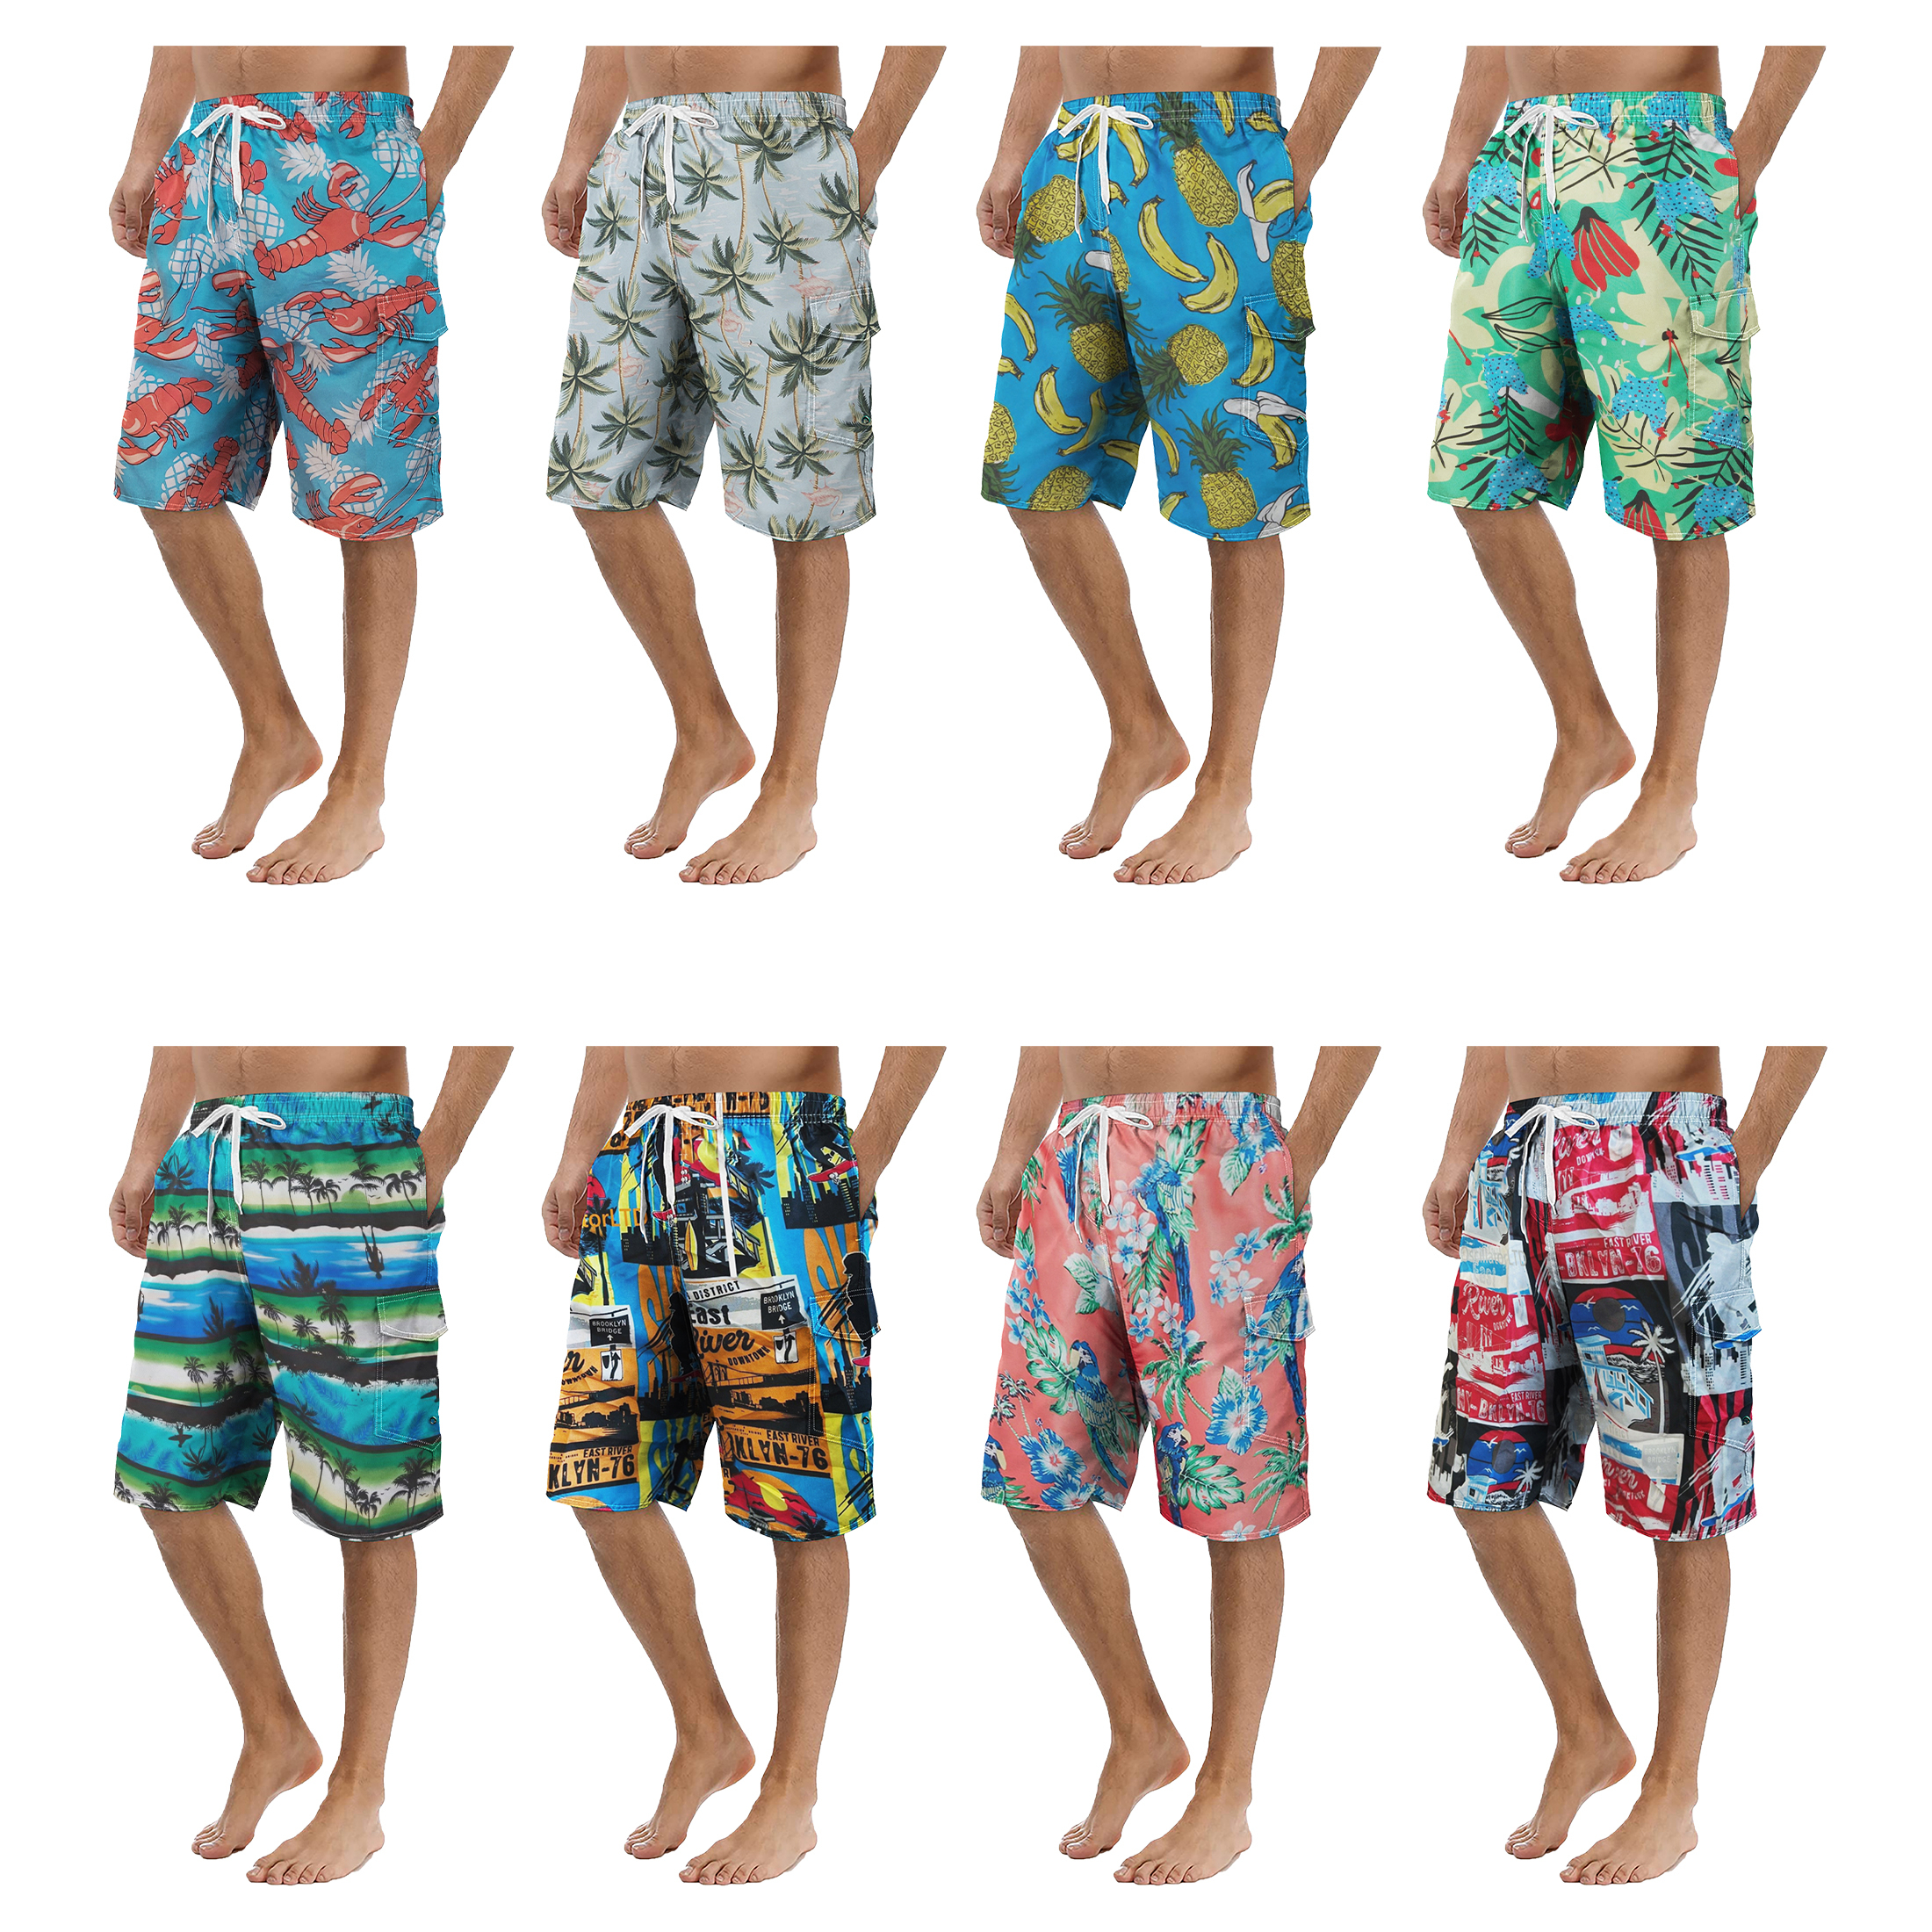 2-Pack Men's Quick Dry Printed Cargo Swim Shorts With Pockets Regular Flex Bathing Board Suits & Trunks - XXL